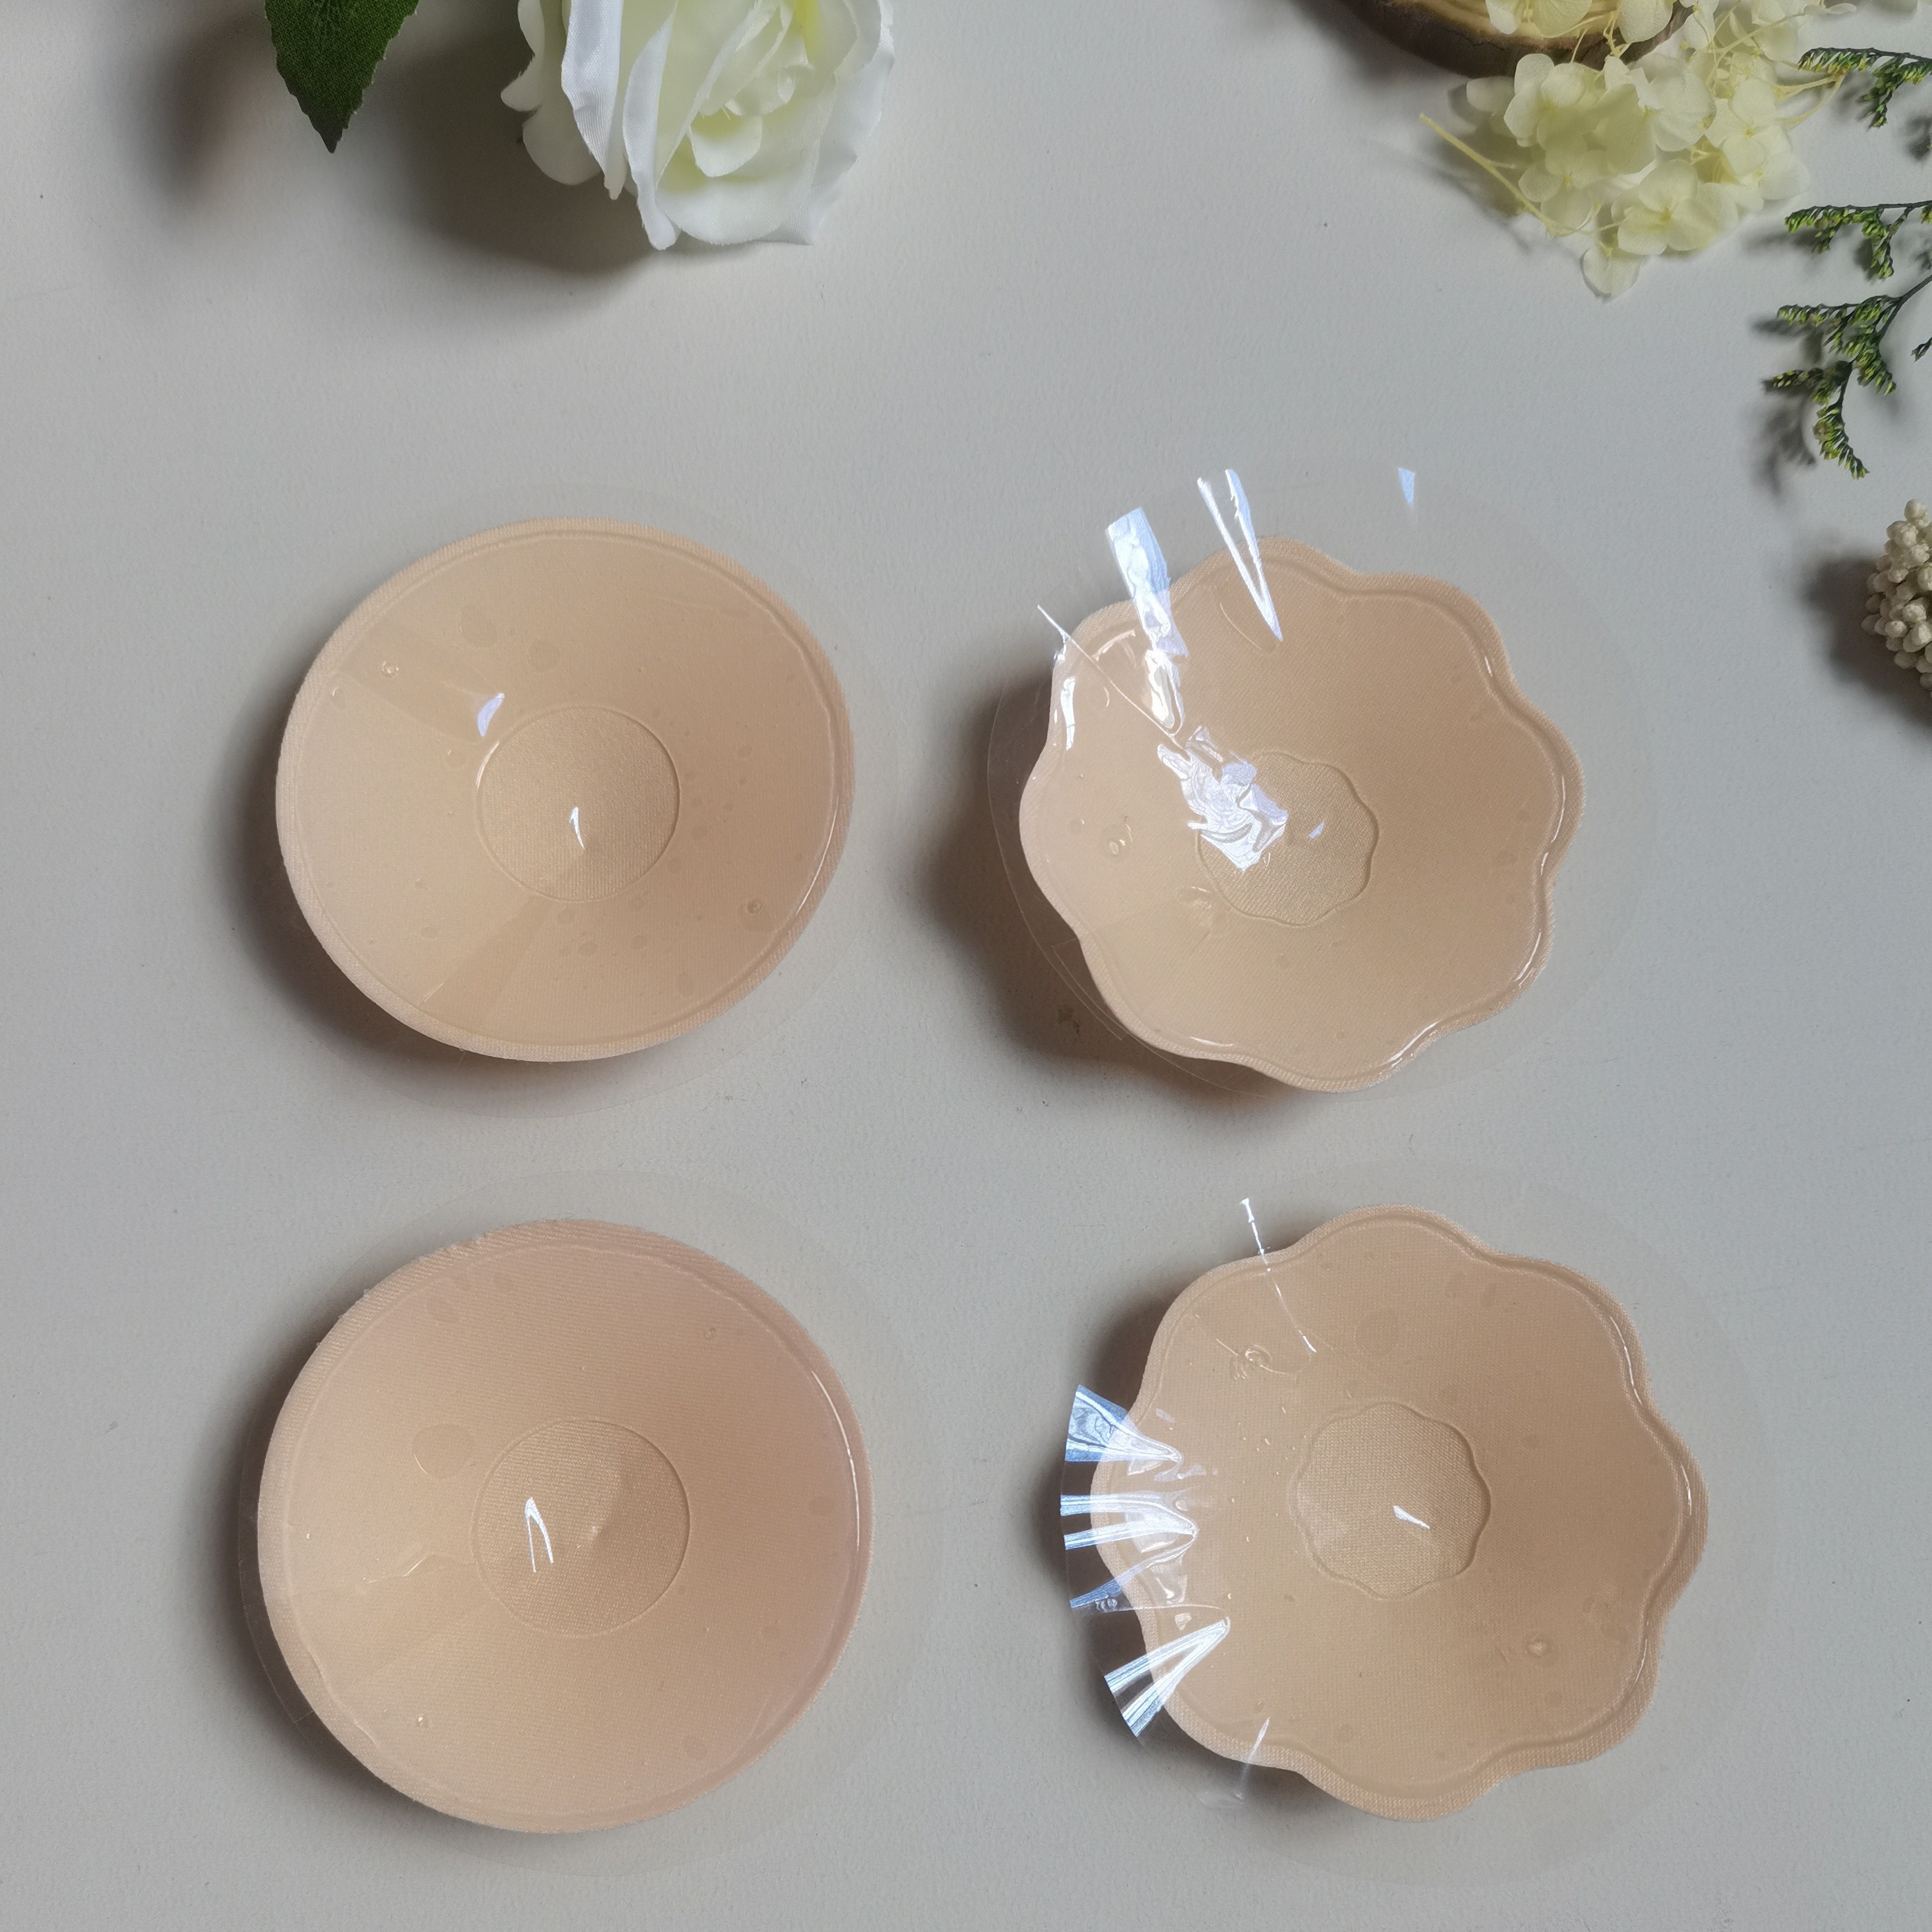 Flower Silicone Nipple Covers - Porcelain